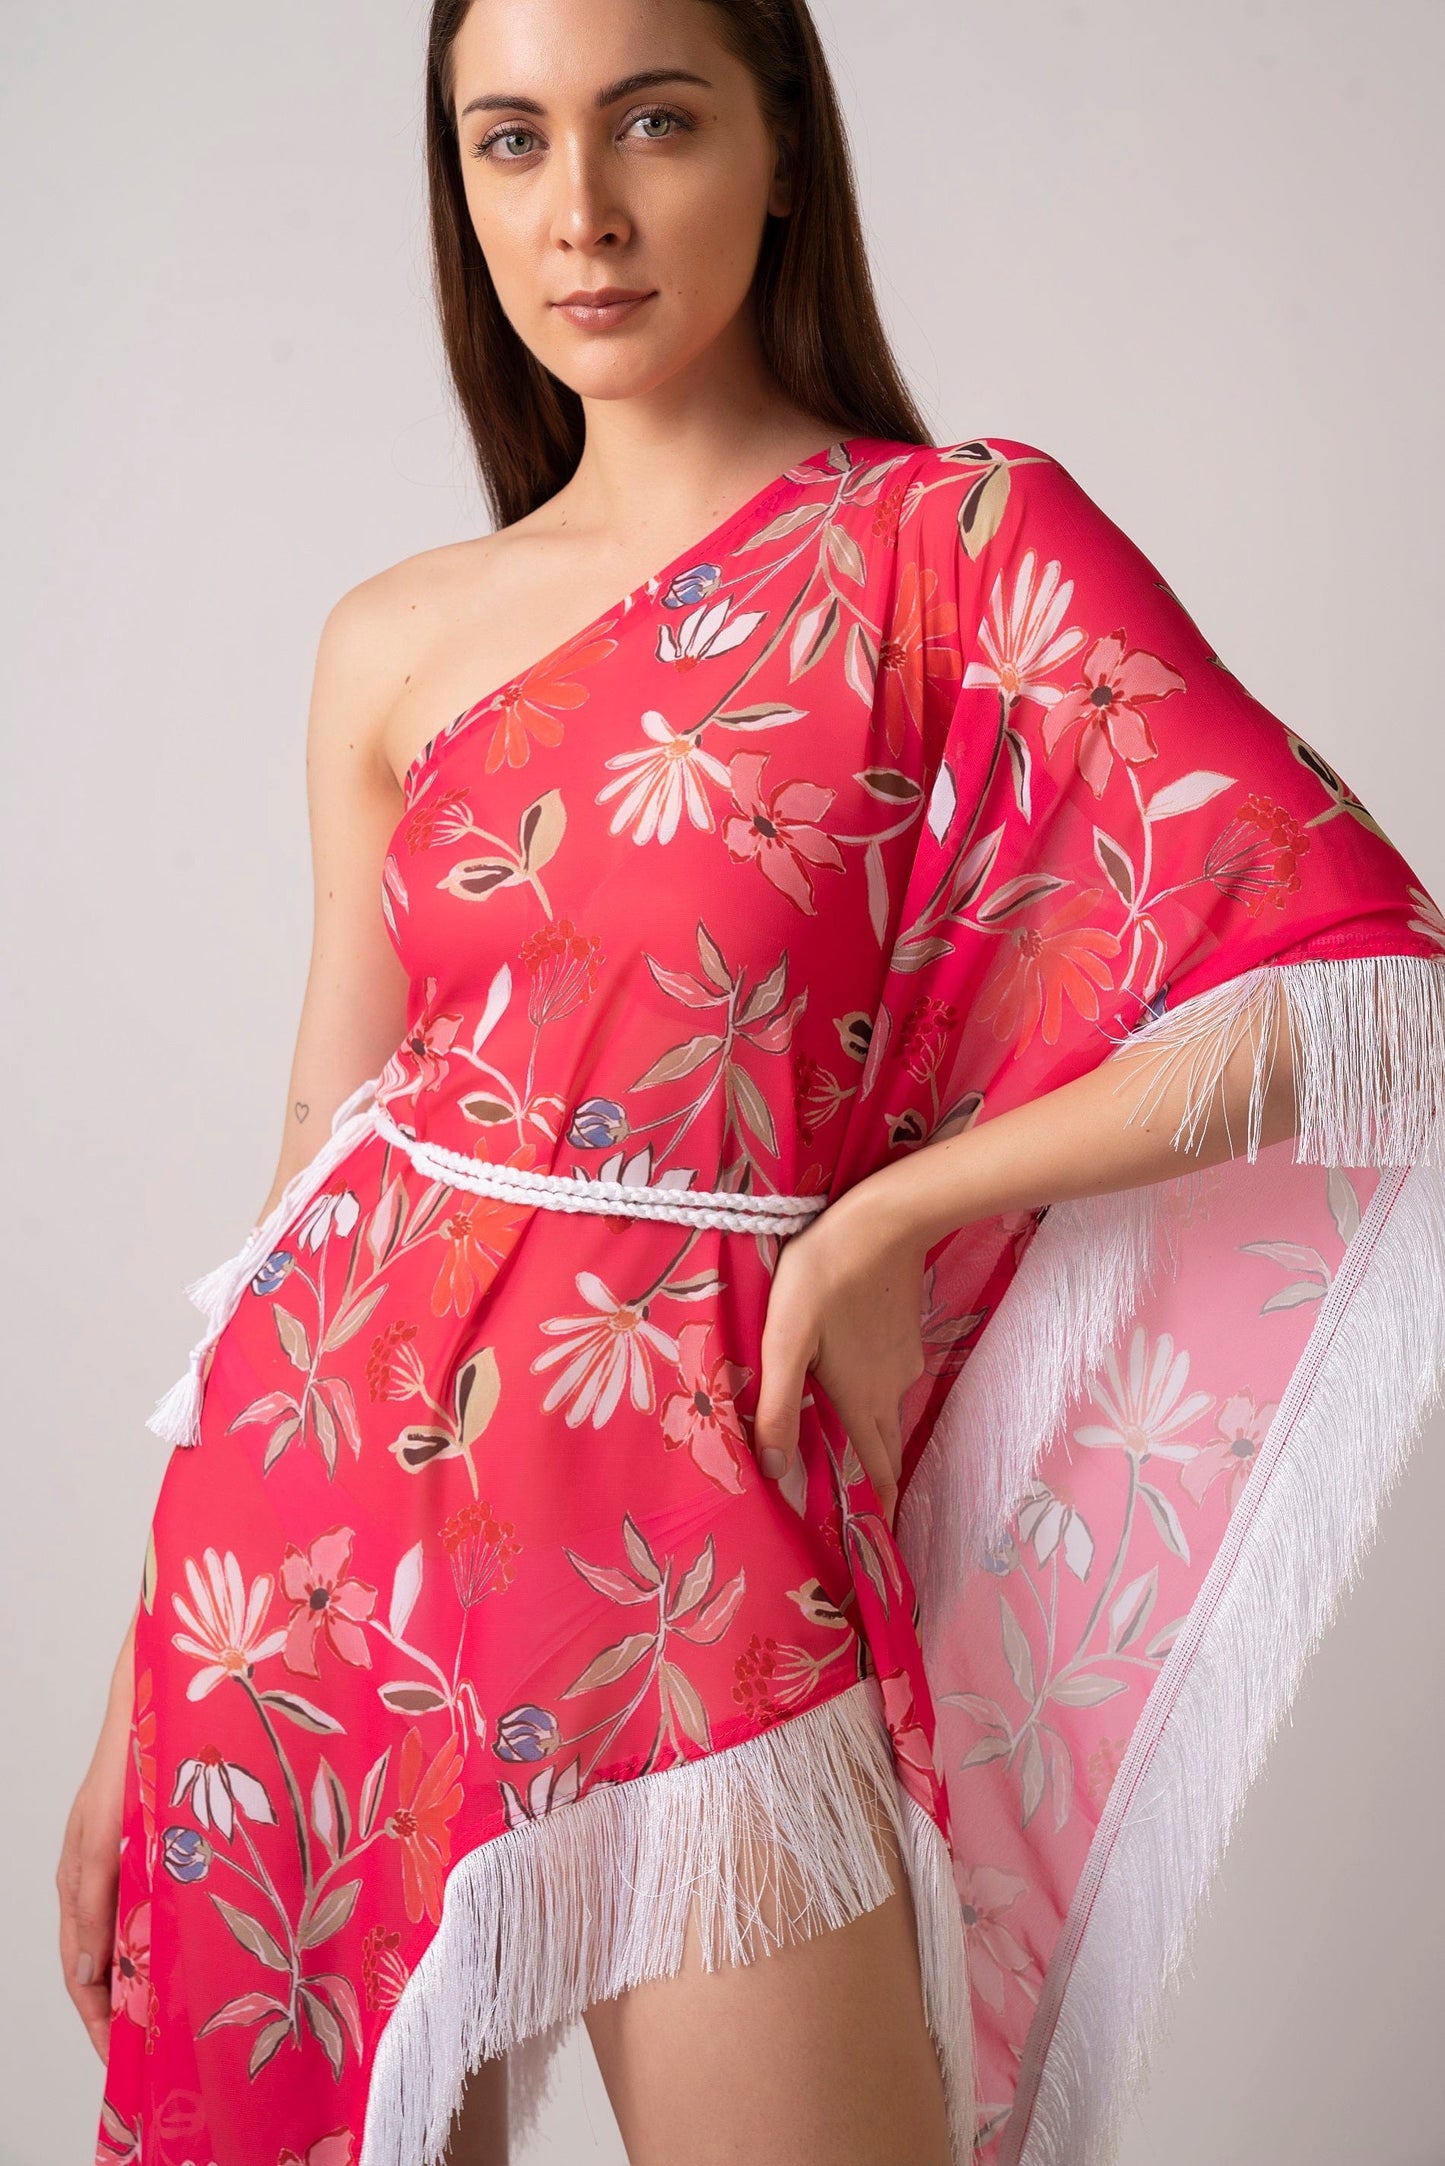 Designer kaftan dress is made of luxurious georgette fabric. It's a perfect resort wear or vacation dress for women